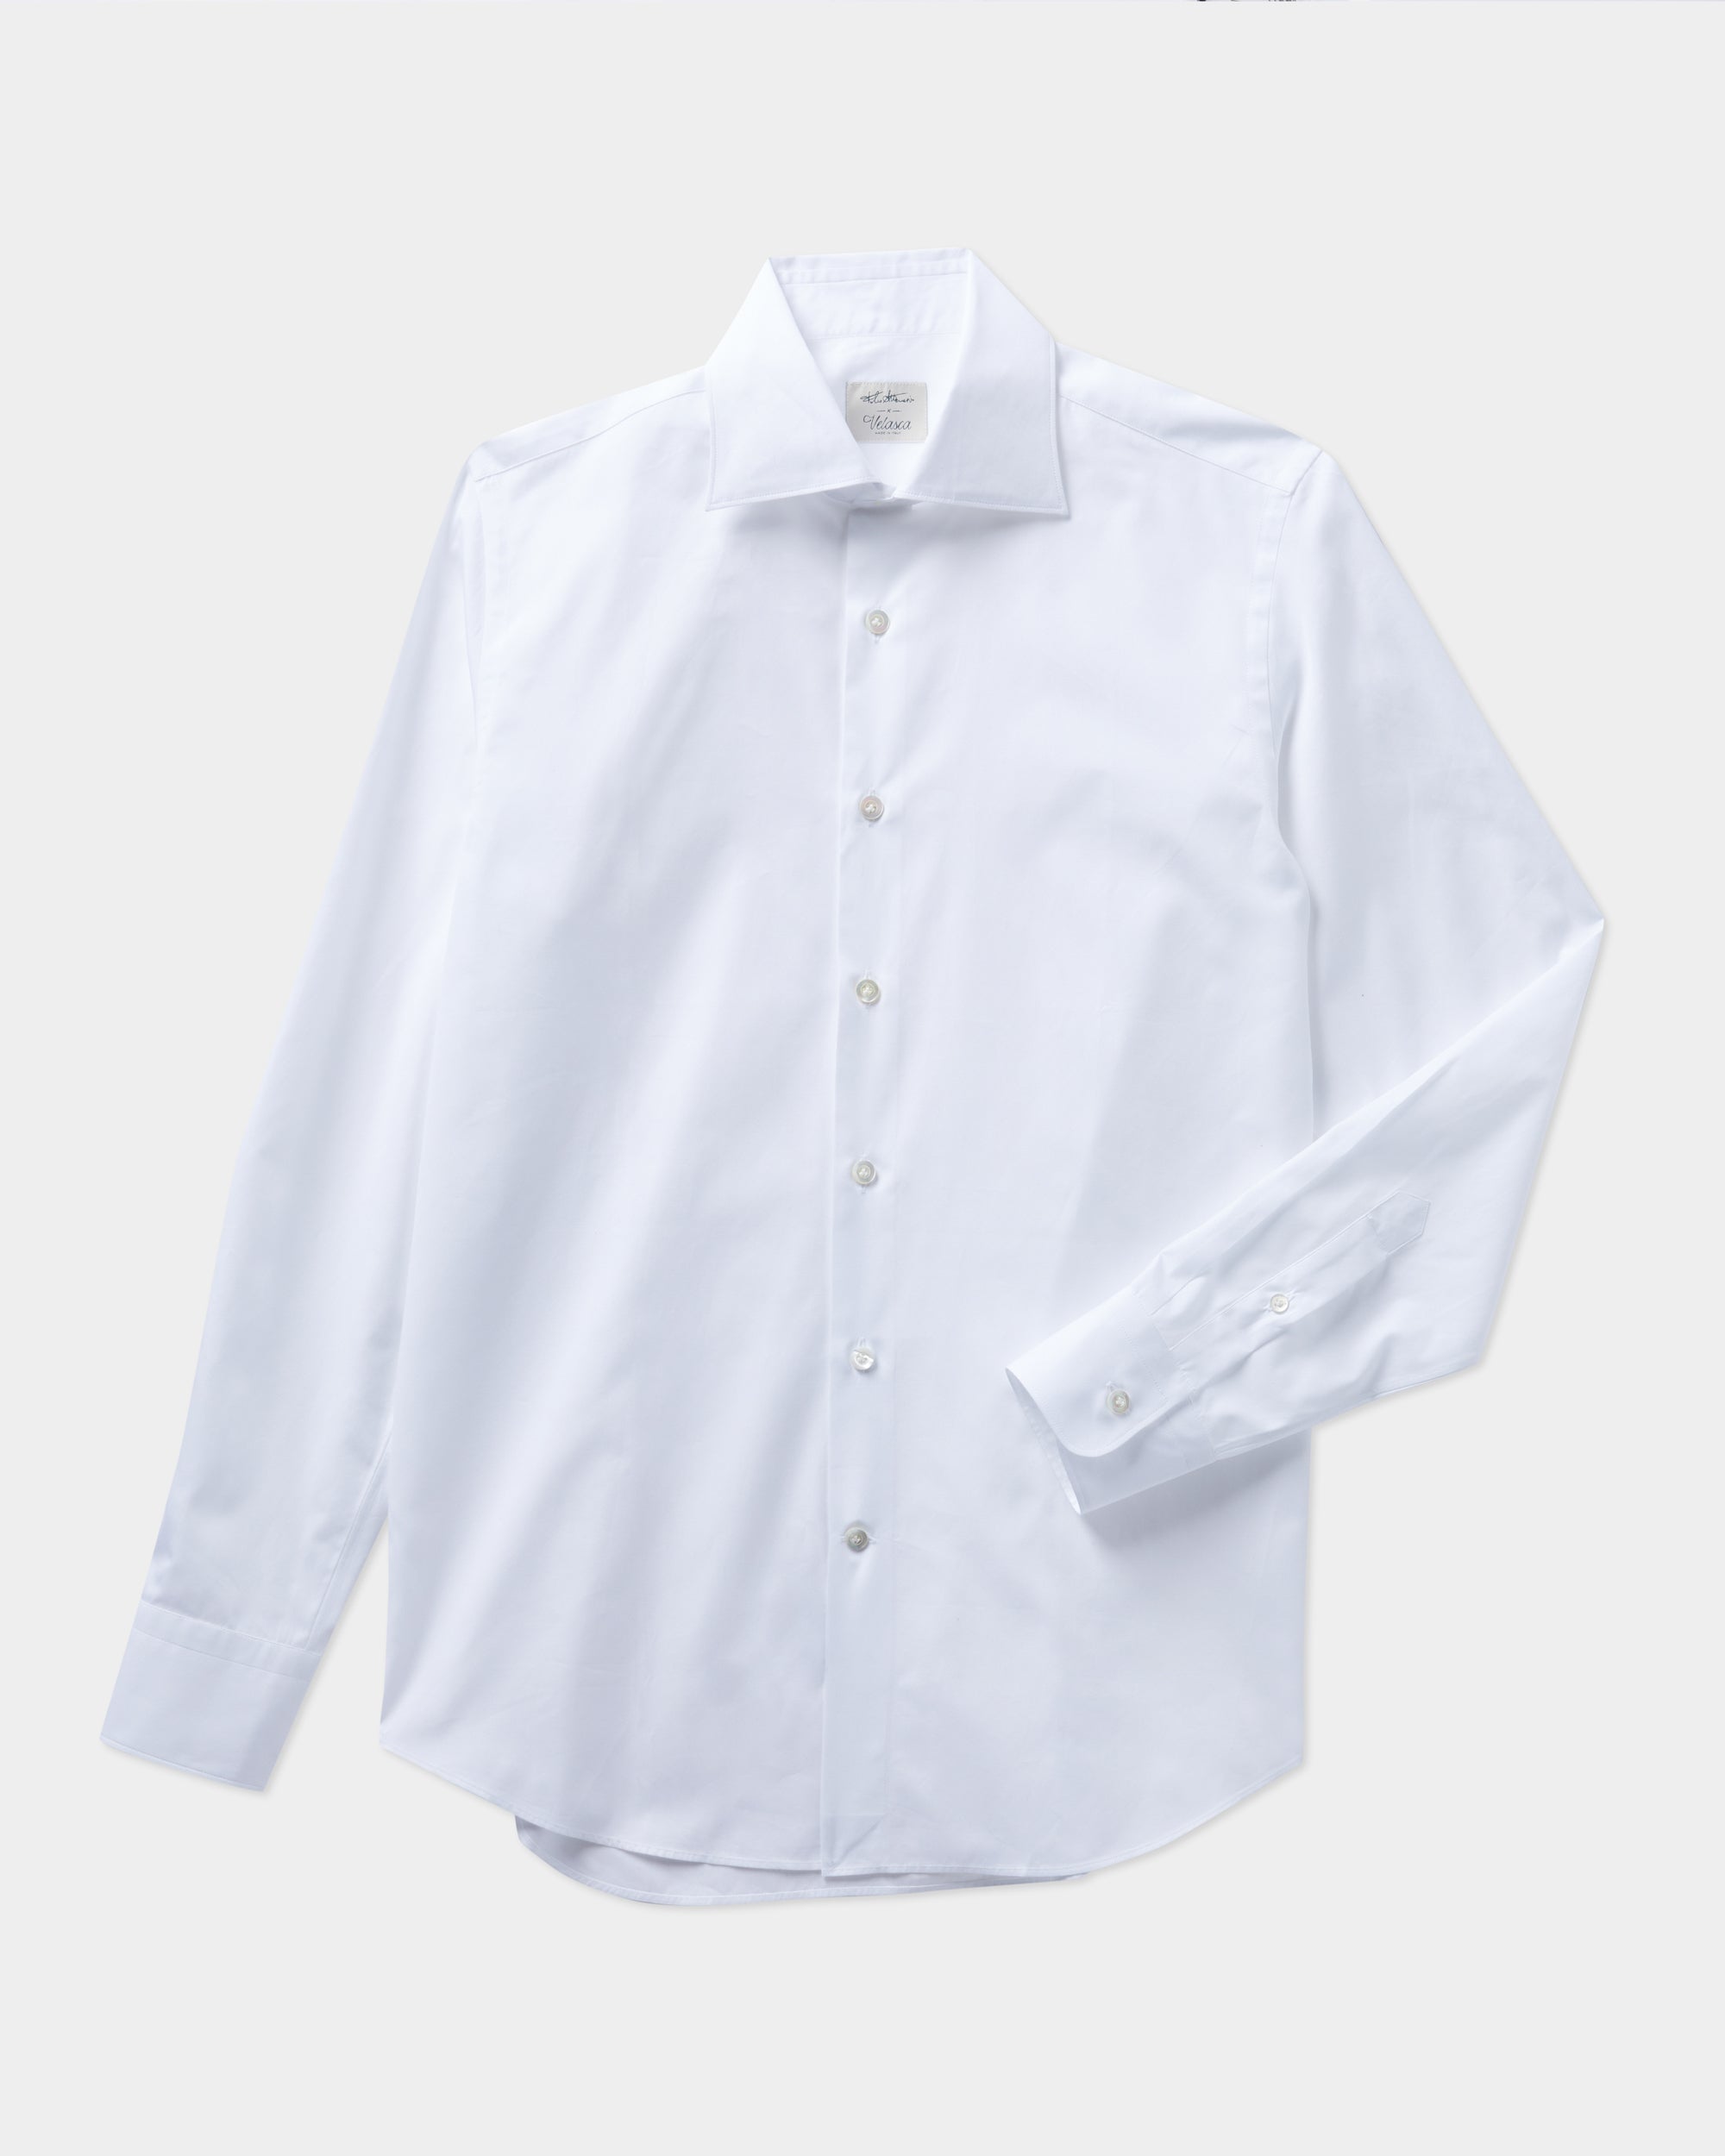 Velasca | Men\'s white cotton shirt, Italy in made button-down